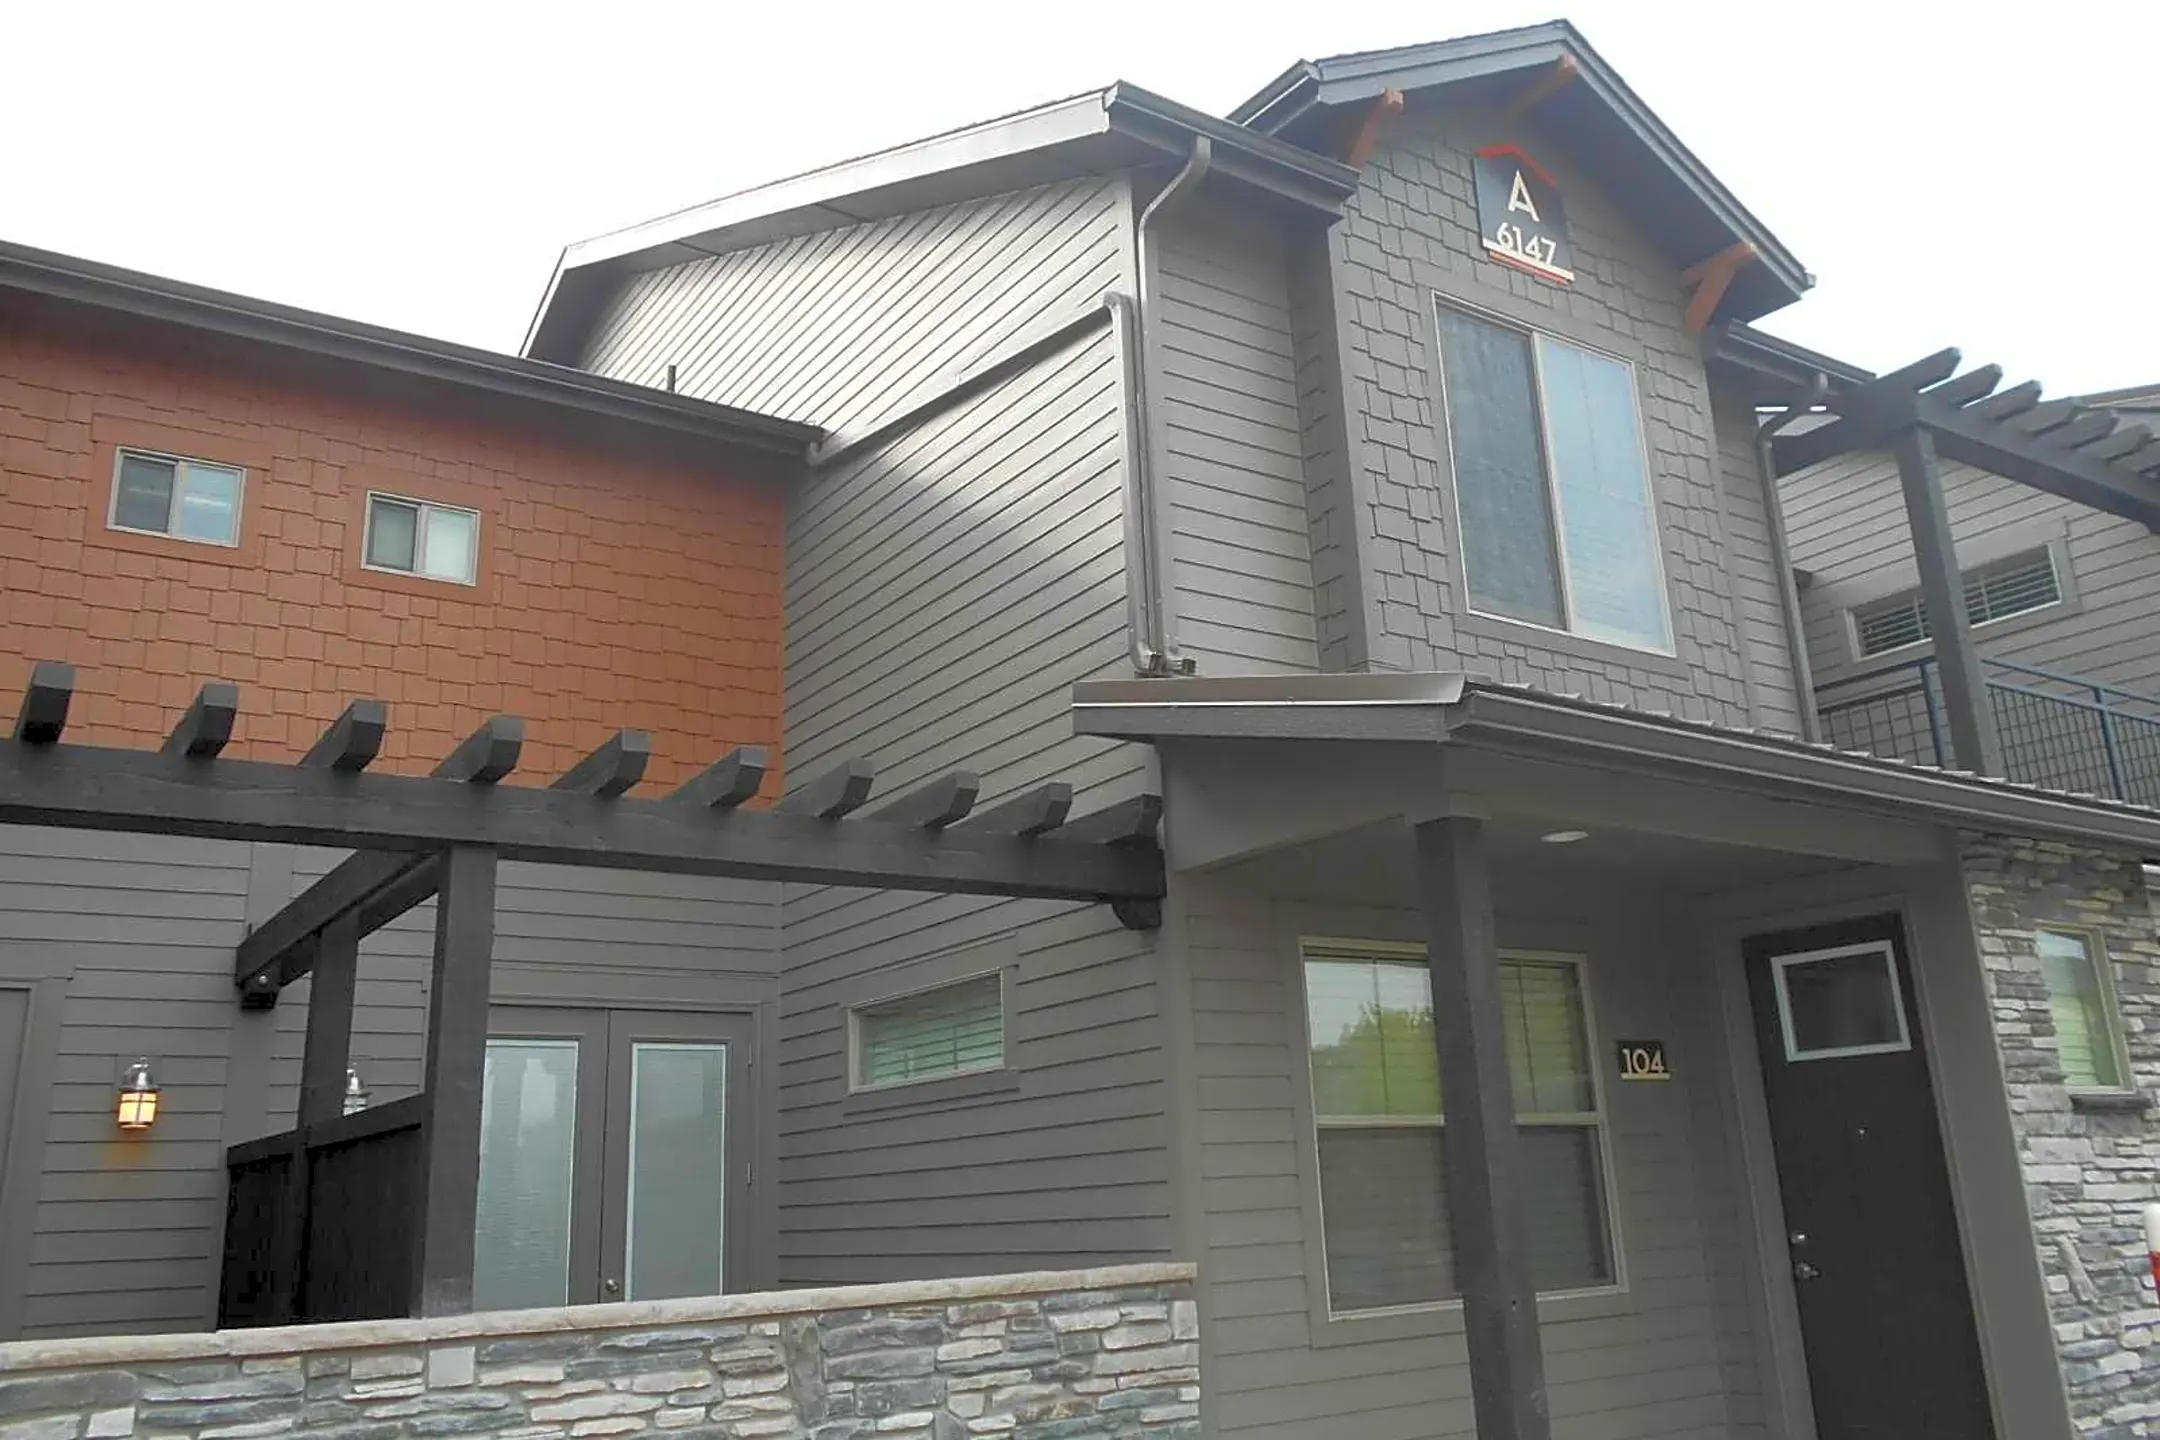 Building - Townhomes at Silvercloud - Boise, ID